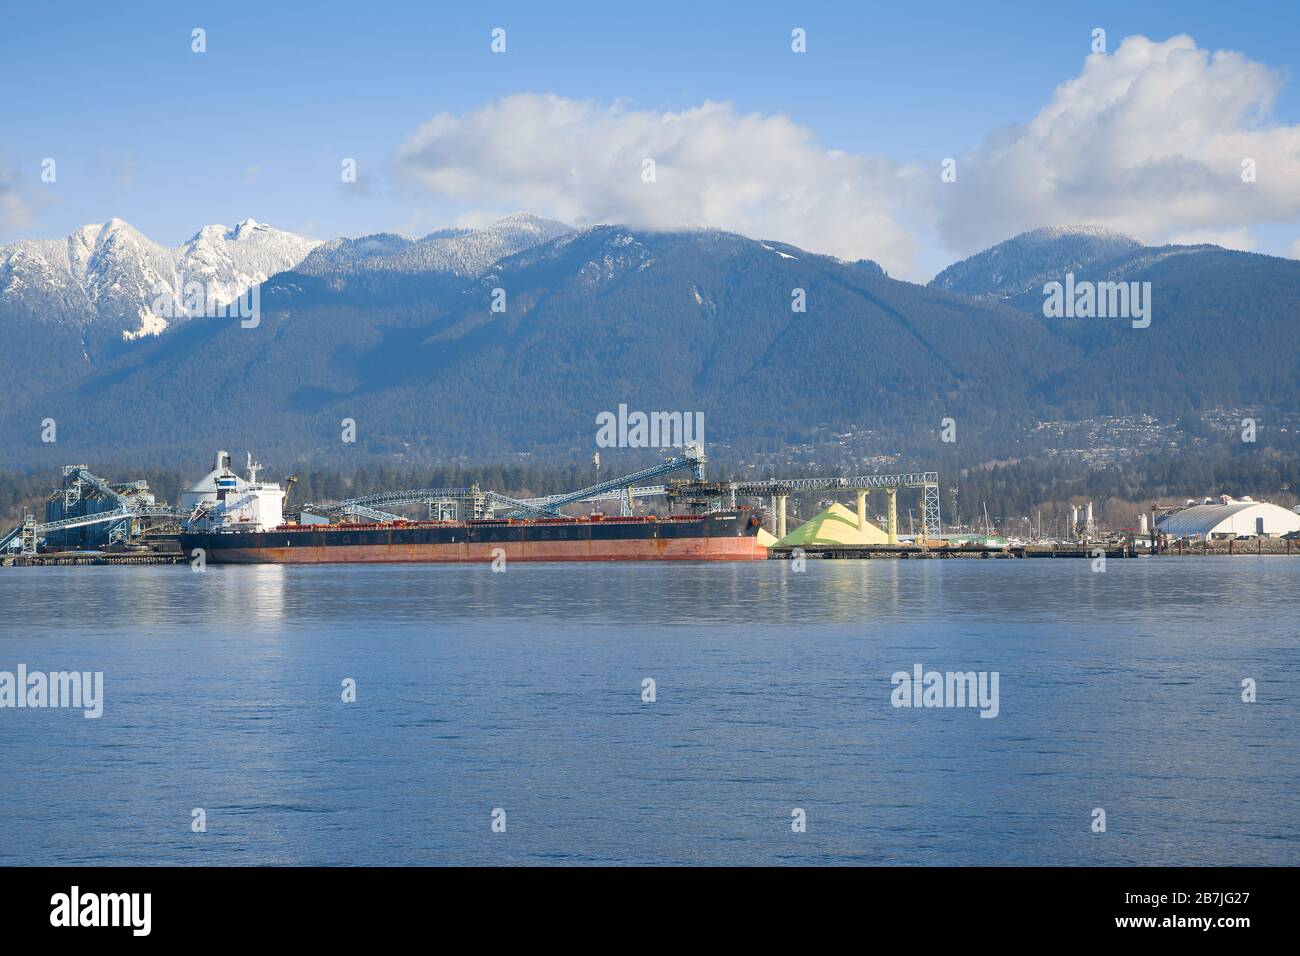 A cargo ship docked in Vancouver Stock Photo